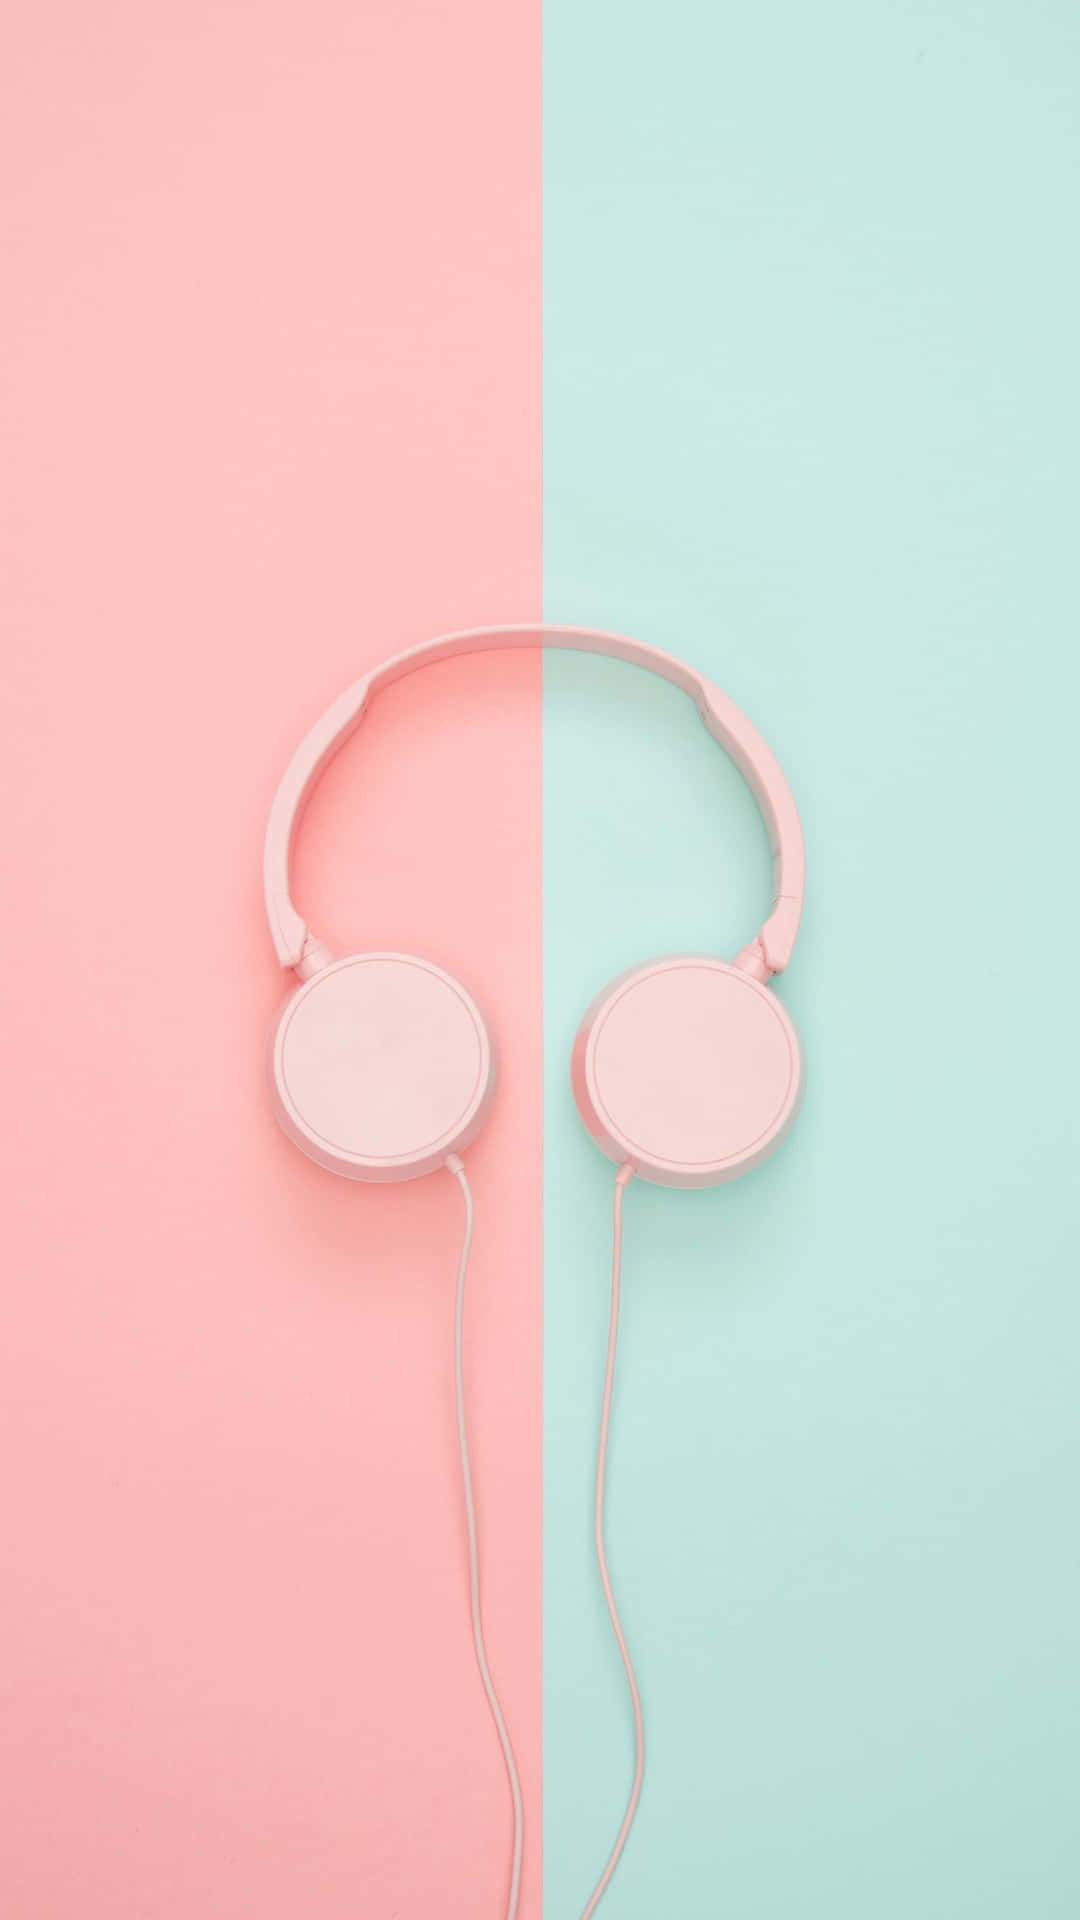 Pink Headphones On A Pink And Blue Background Wallpaper